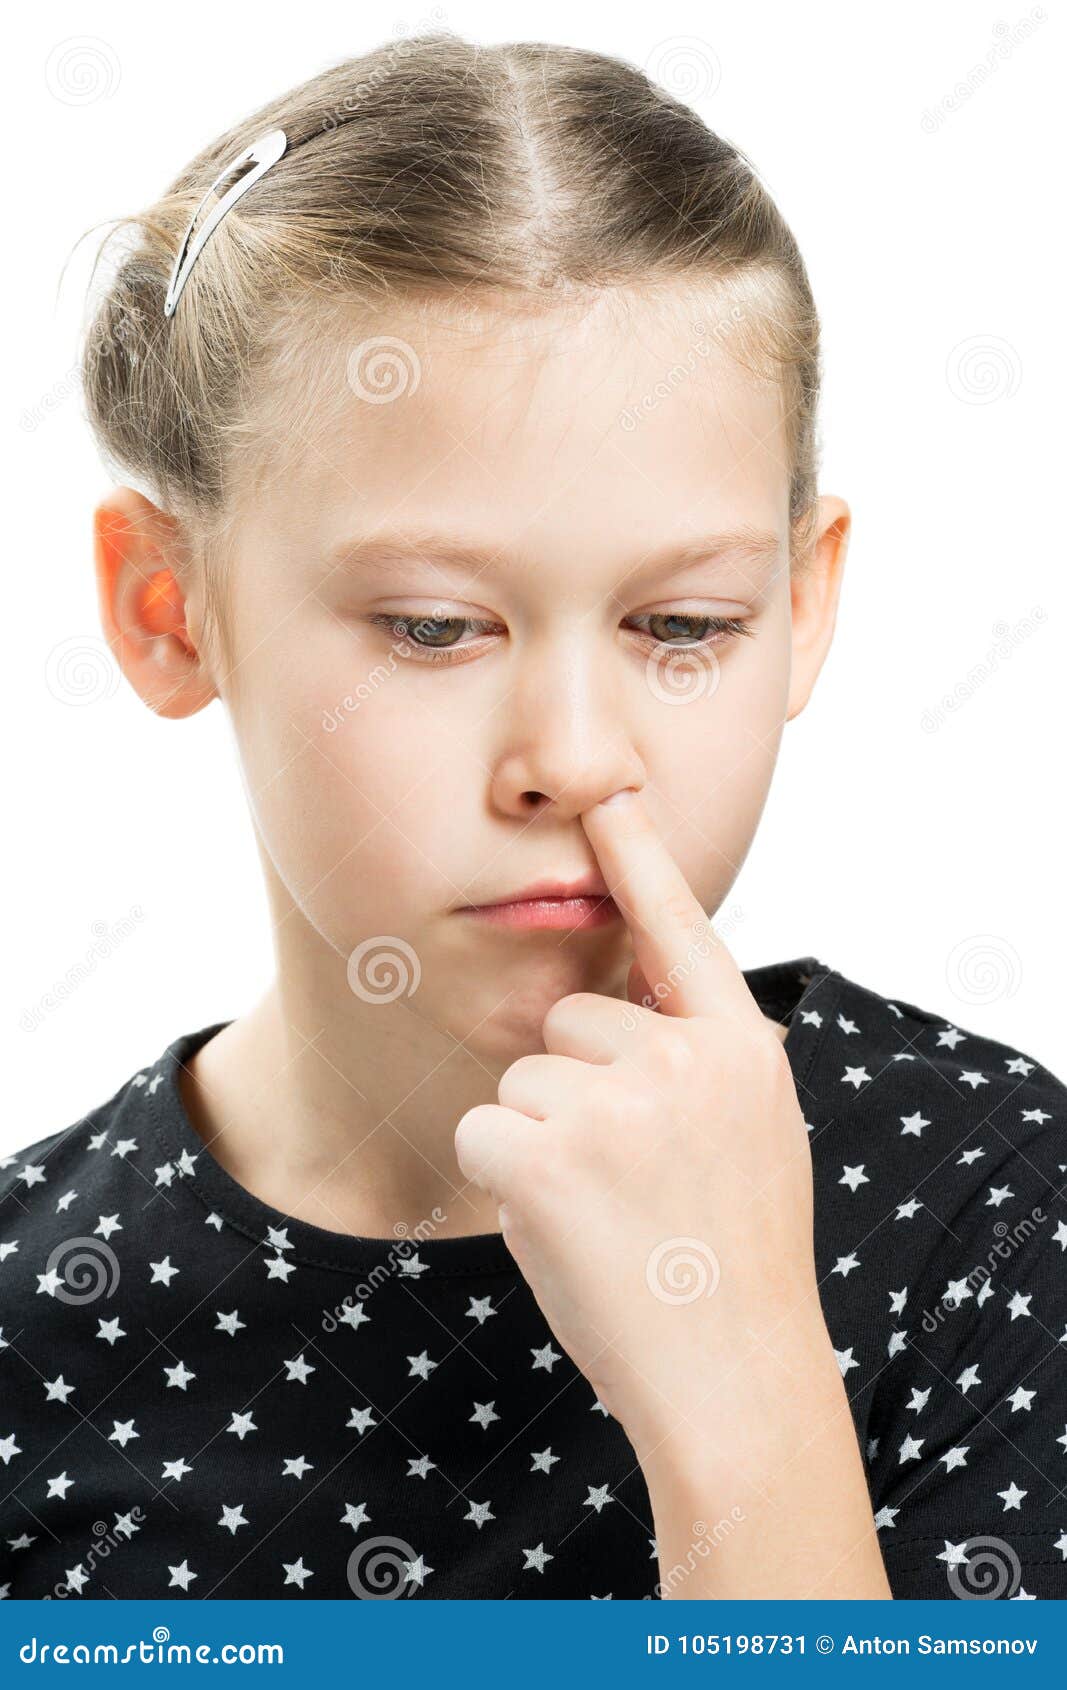 Girl finger in nose stock image. Image of face, nose - 105198731